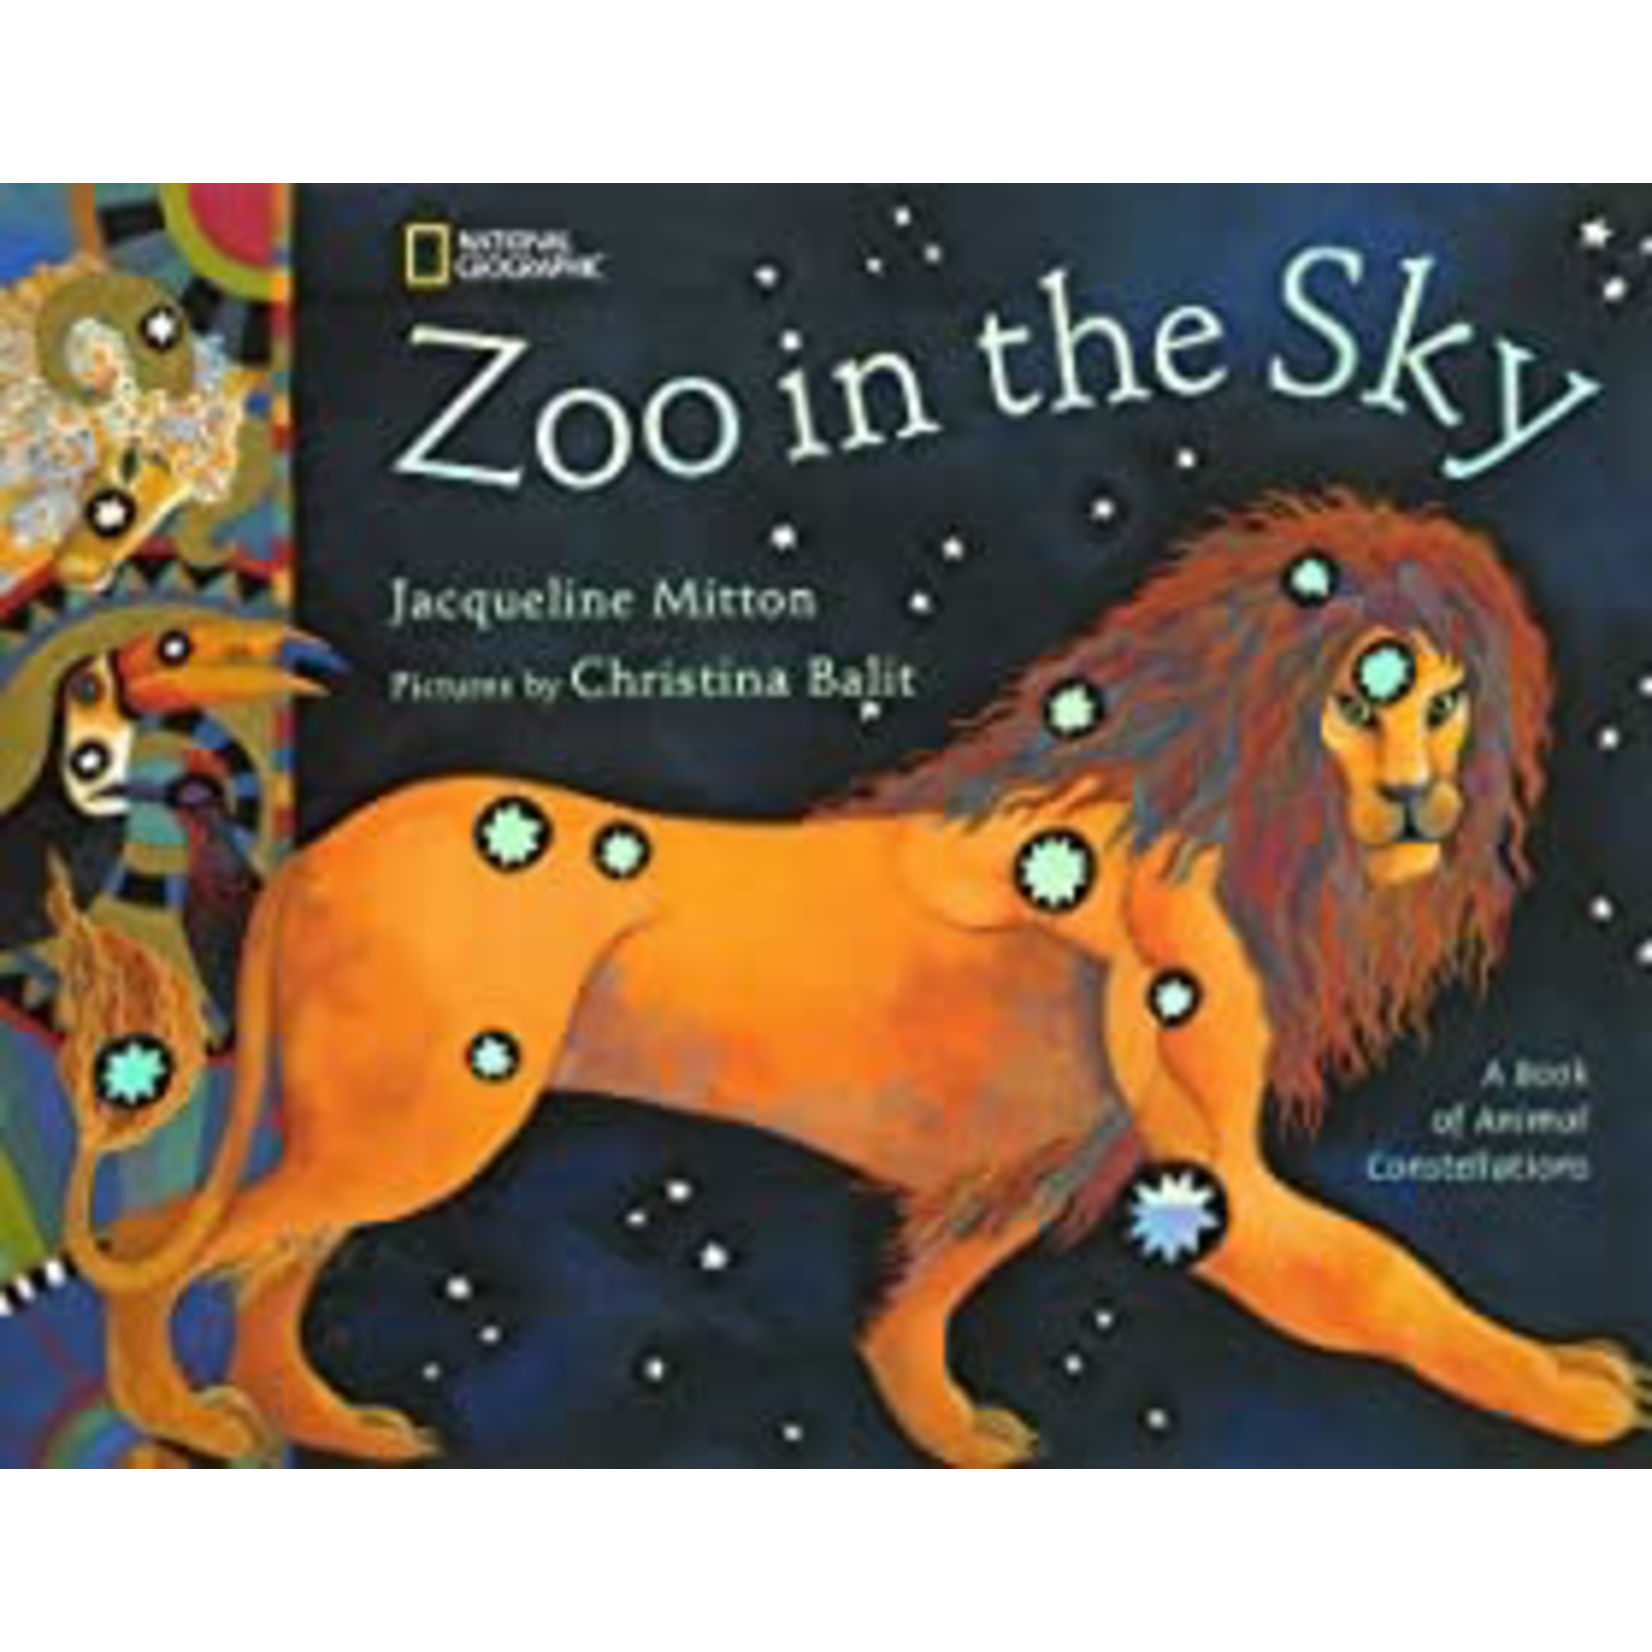 Zoo in the Sky by Jacqueline Mitton